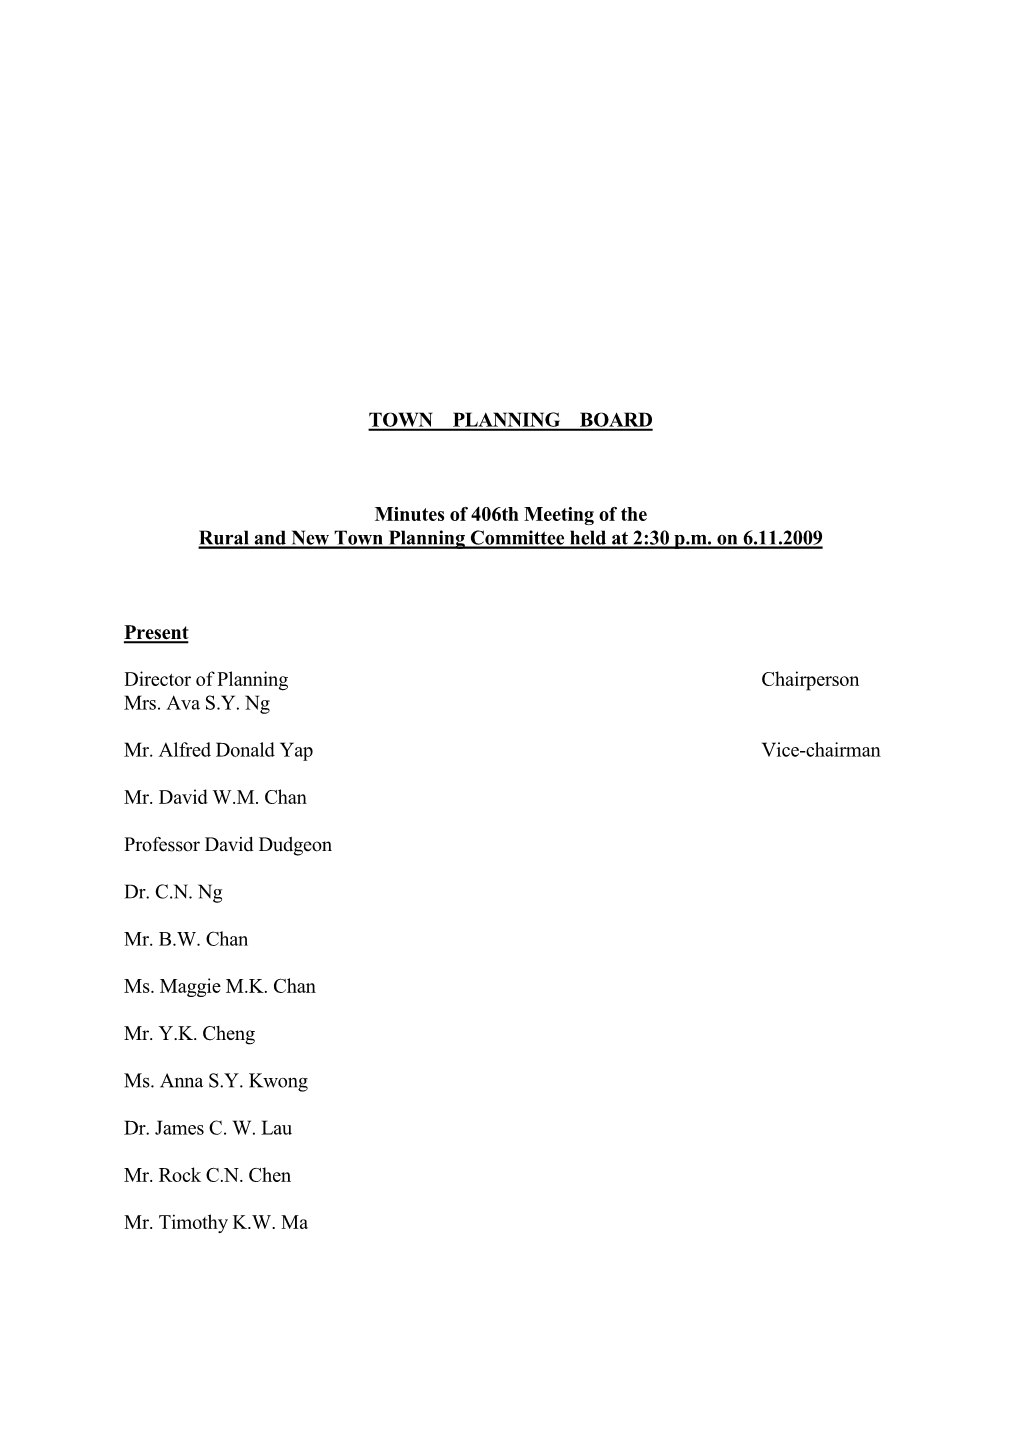 TOWN PLANNING BOARD Minutes of 406Th Meeting of the Rural And